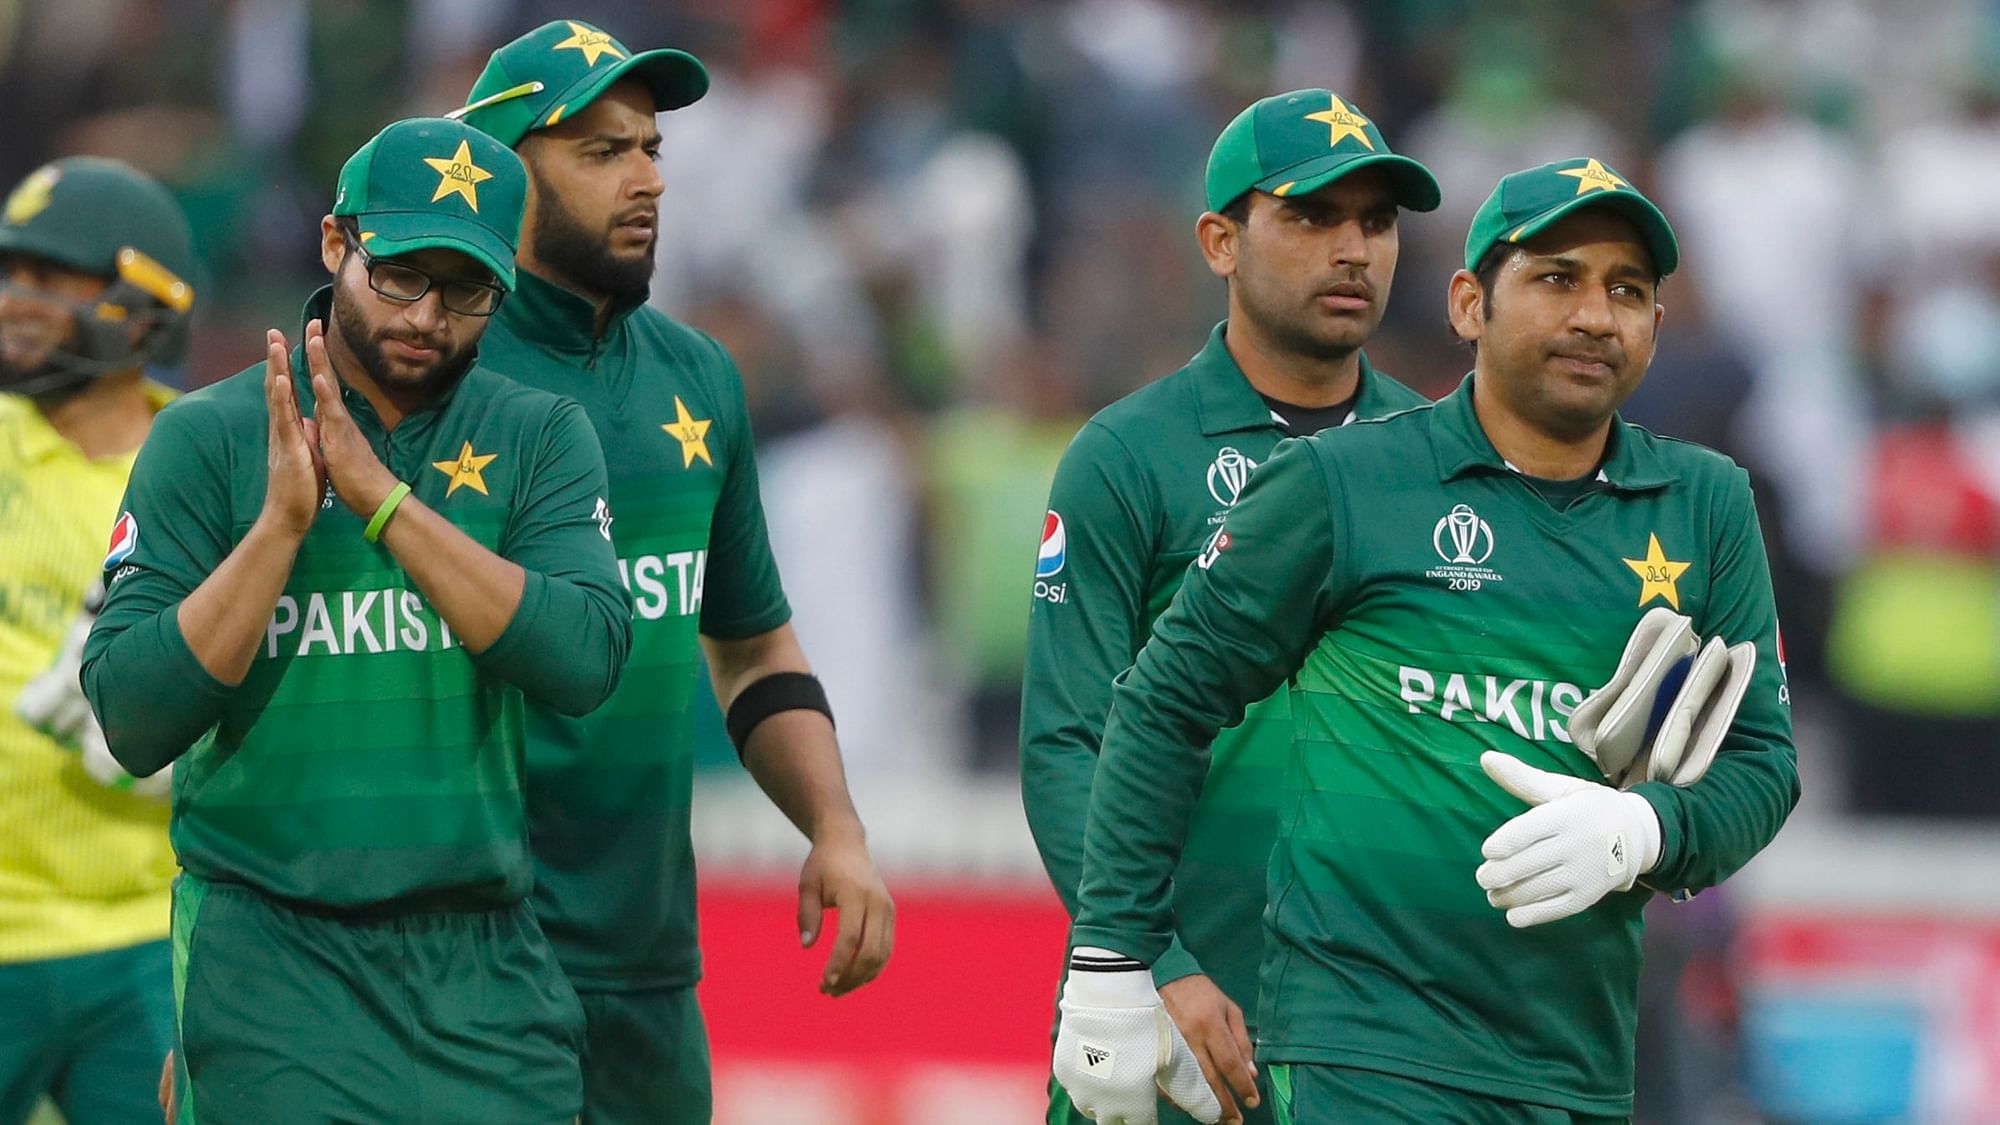 Pakistan bounced back strongly after their loss to India.&nbsp;